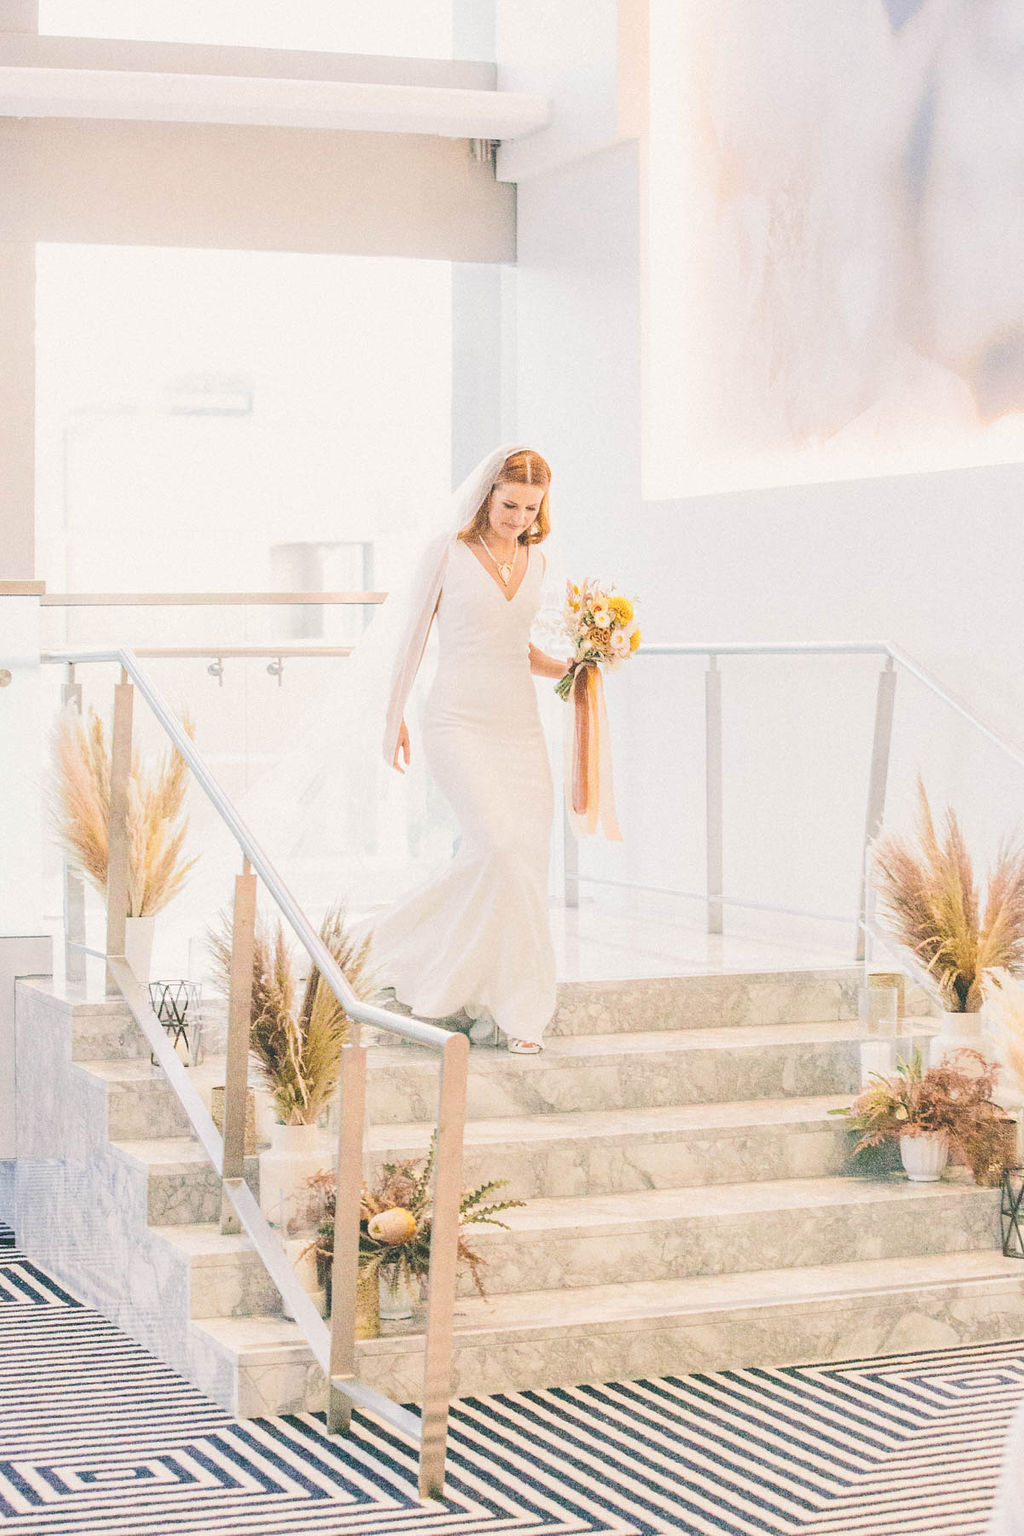 Cool and Chic Downtown Wedding in Los Angeles Liz Bretz23